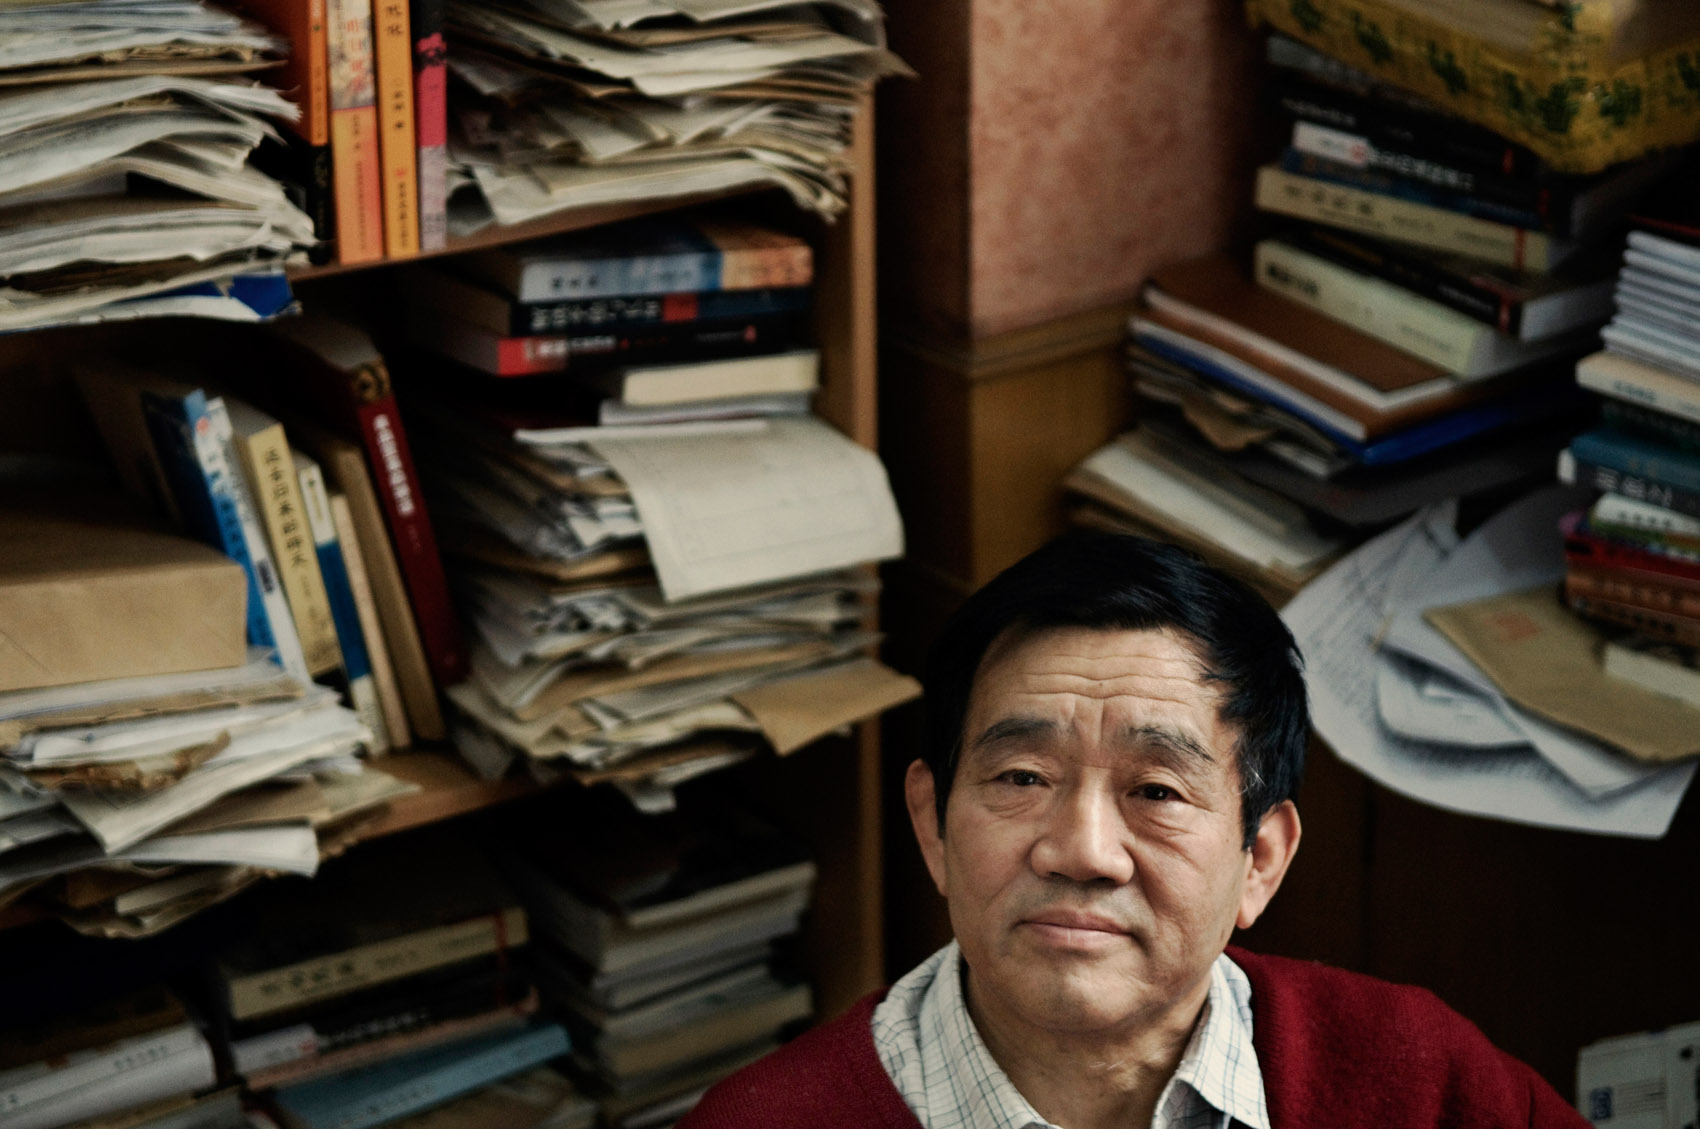  Yang Jisheng, journalist and writer, at the office of the history journal Yanhuang Chunqiu, of which he is deputy publisher. Yang is the author of two books both banned in mainland China. "Tombstone", published in 2008, is a thoroughly documented ac